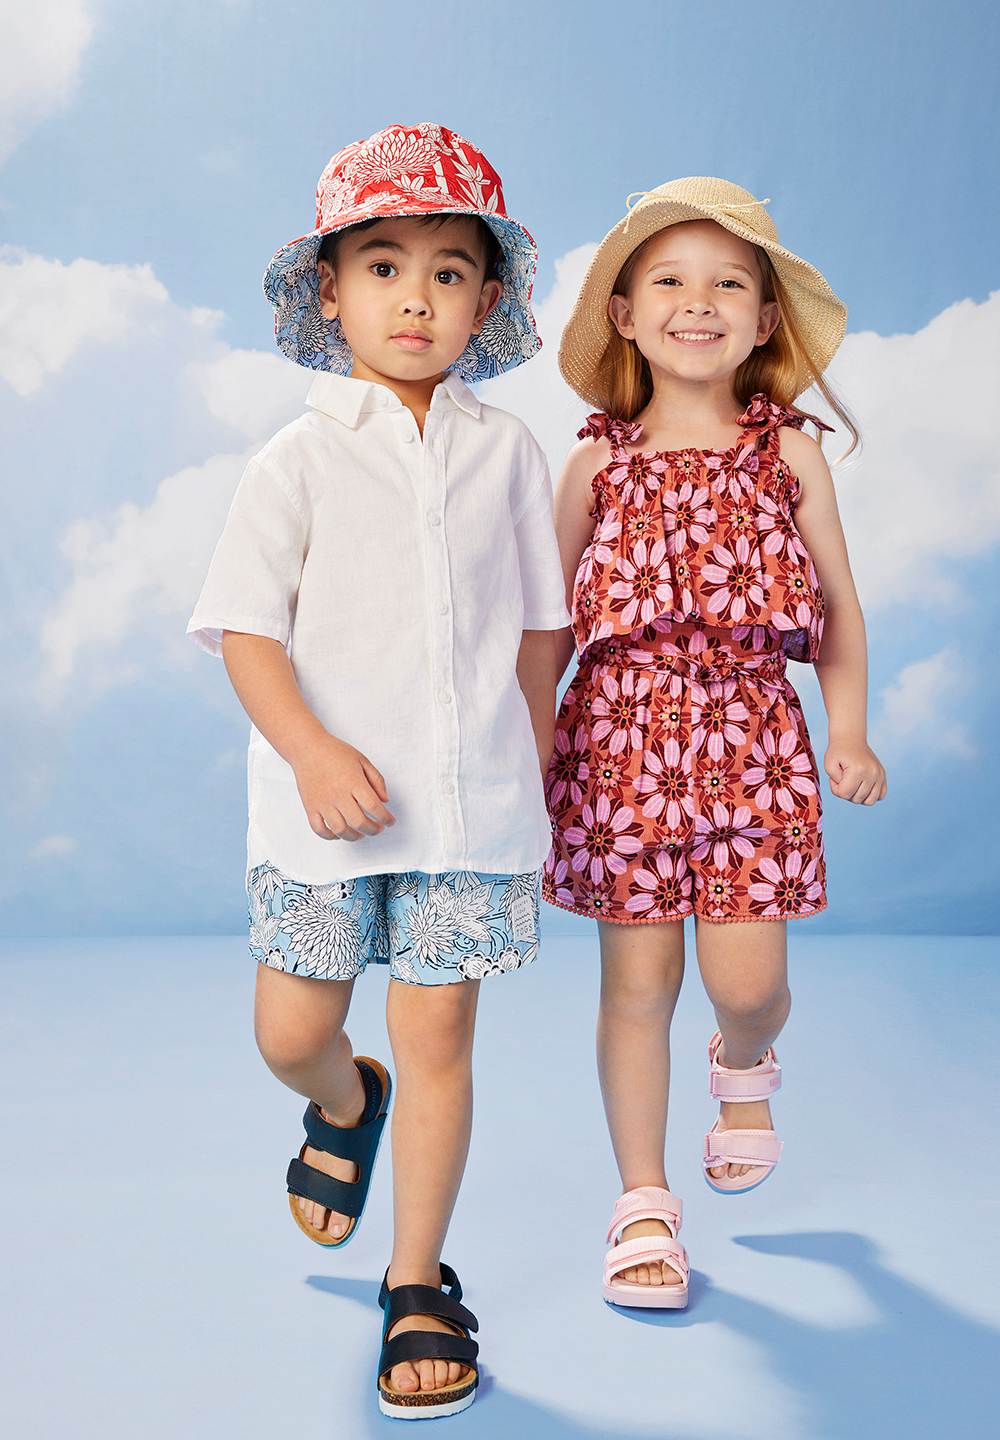 Spring Kidswear: Jump, Skip, Hop Into This Season’s Must-Haves